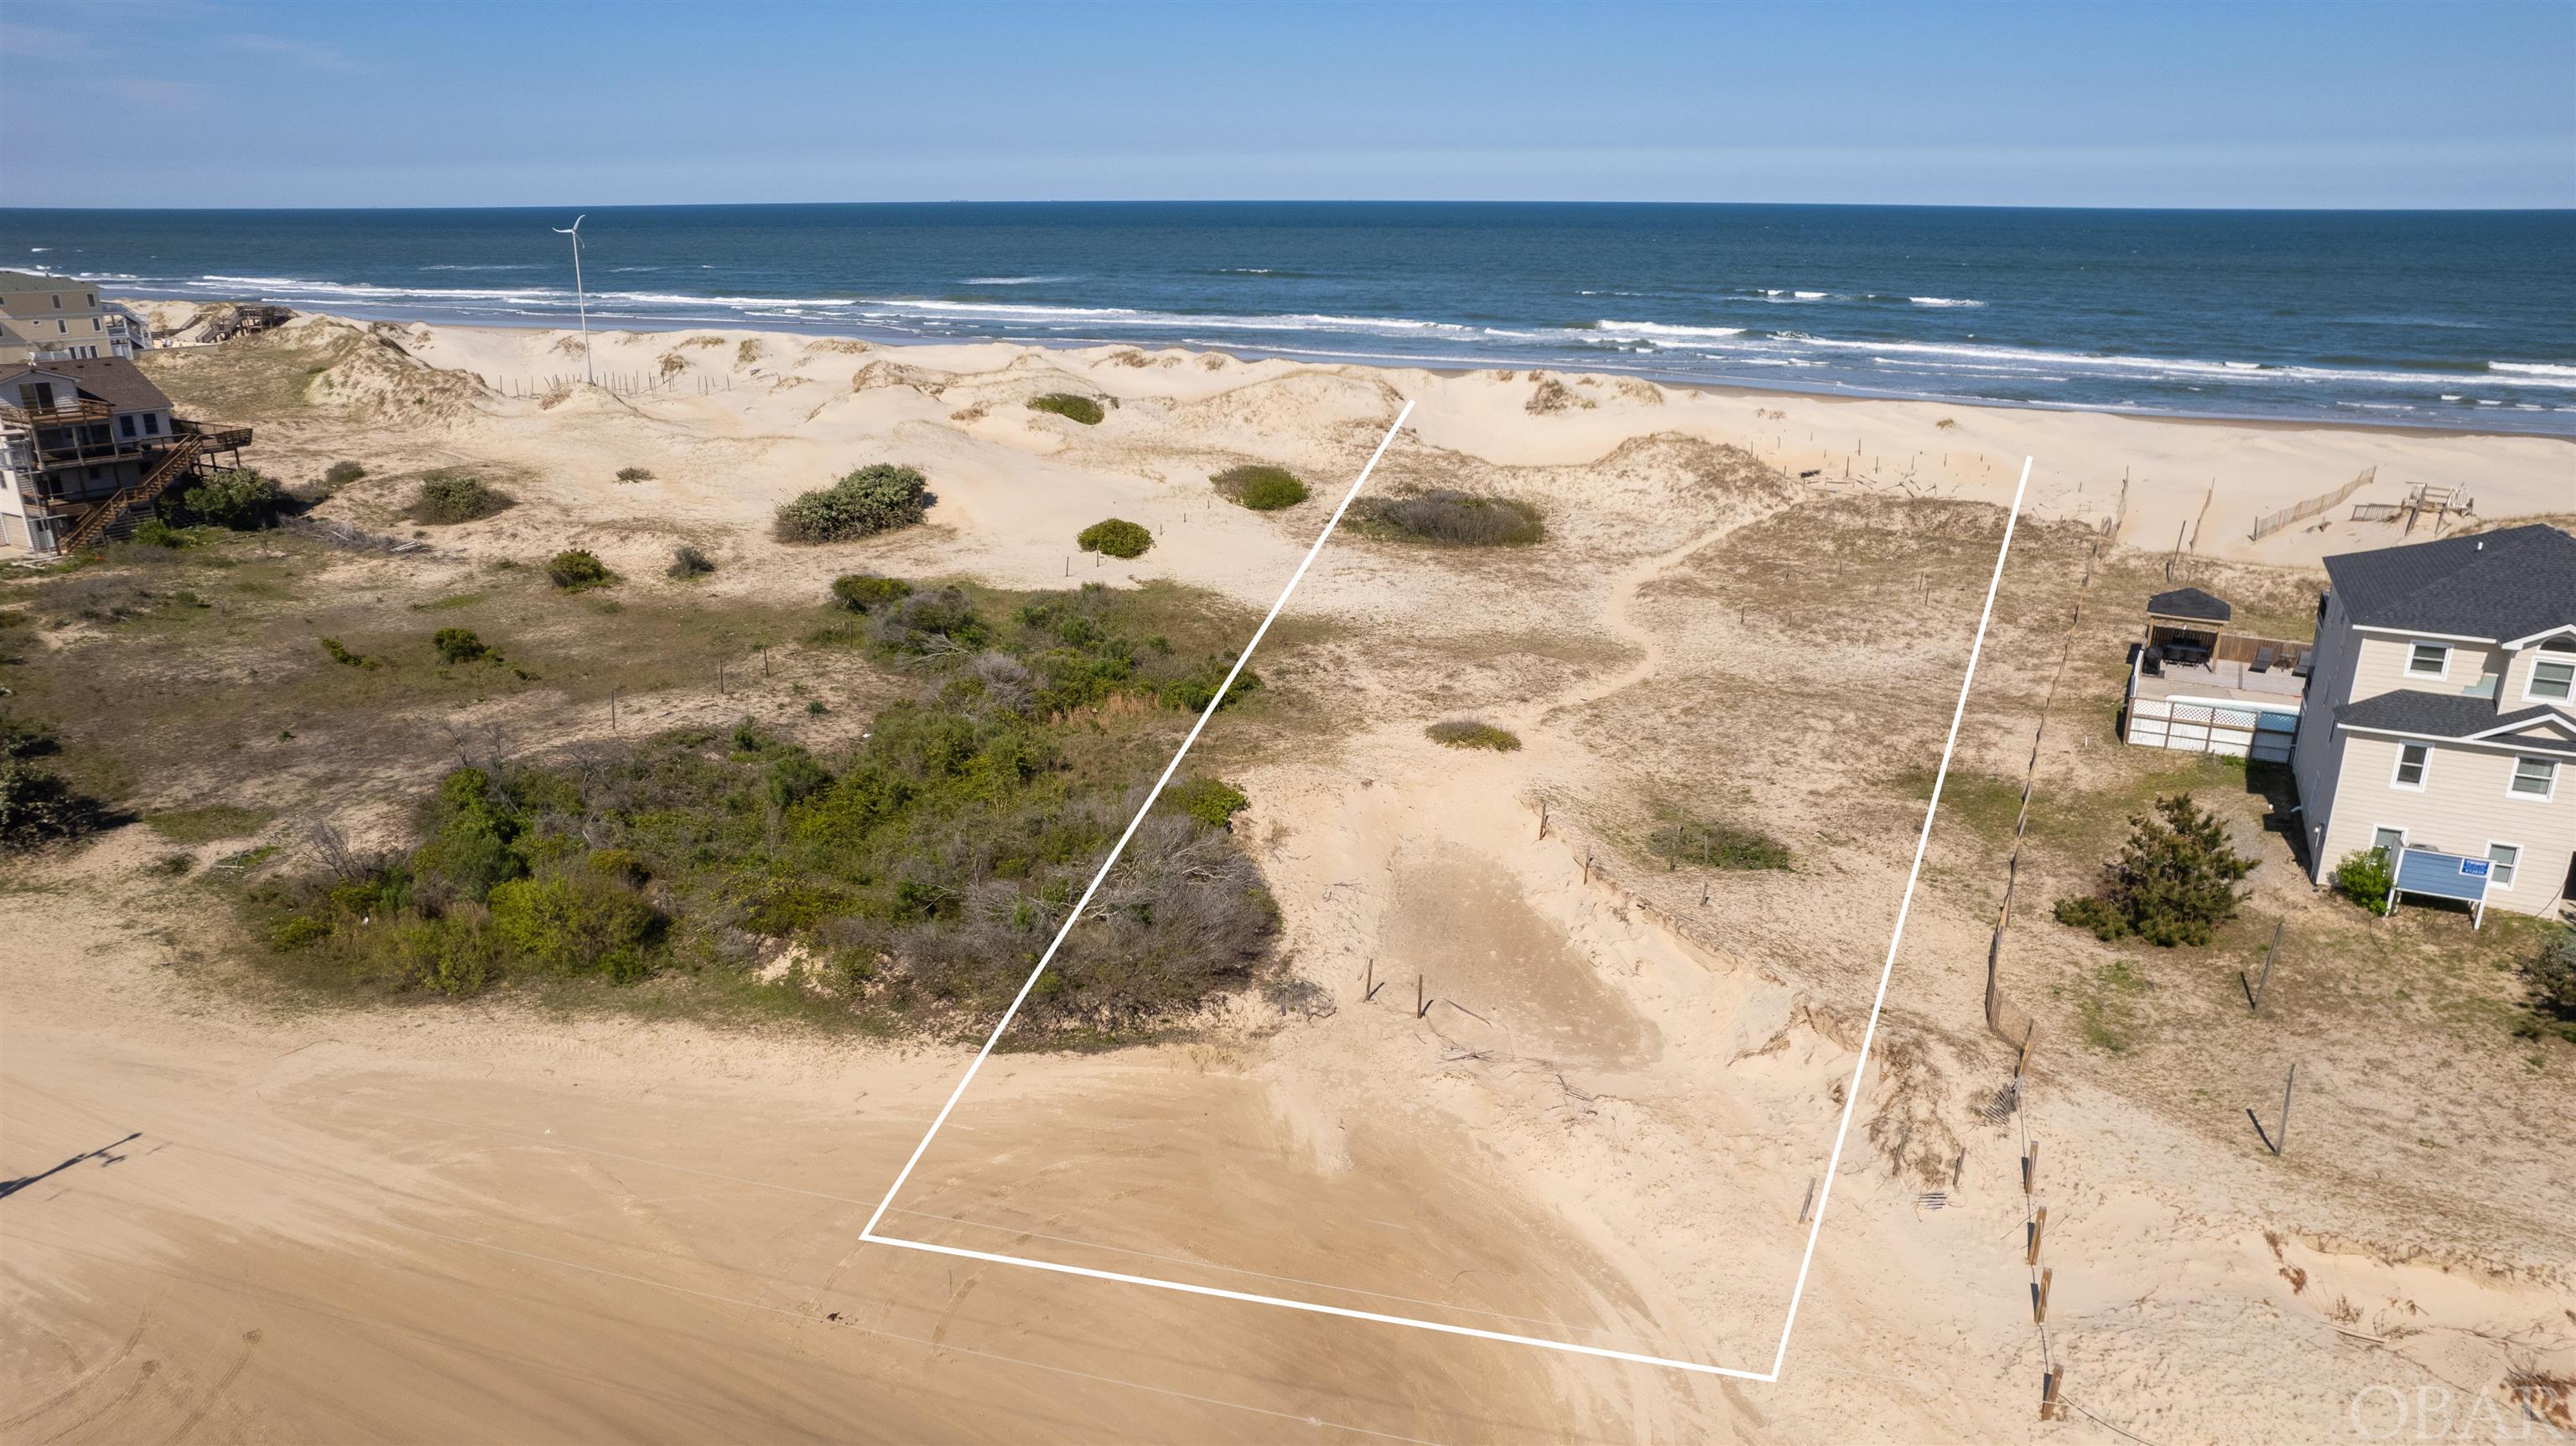 Quality 80' wide Oceanfront lot offering with great elevation and massive stable dune line.  This lot could support a sizable home if desired and would be great for either a personal beach house or a high-potential vacation rental investment.  Additional 10ft easement on the South side of the lot for an additional buffer from the neighboring property.  Majority of building envelope located in the x flood zone!  Lot sits on the widest beach in the 4wd area.  Give this one a look!